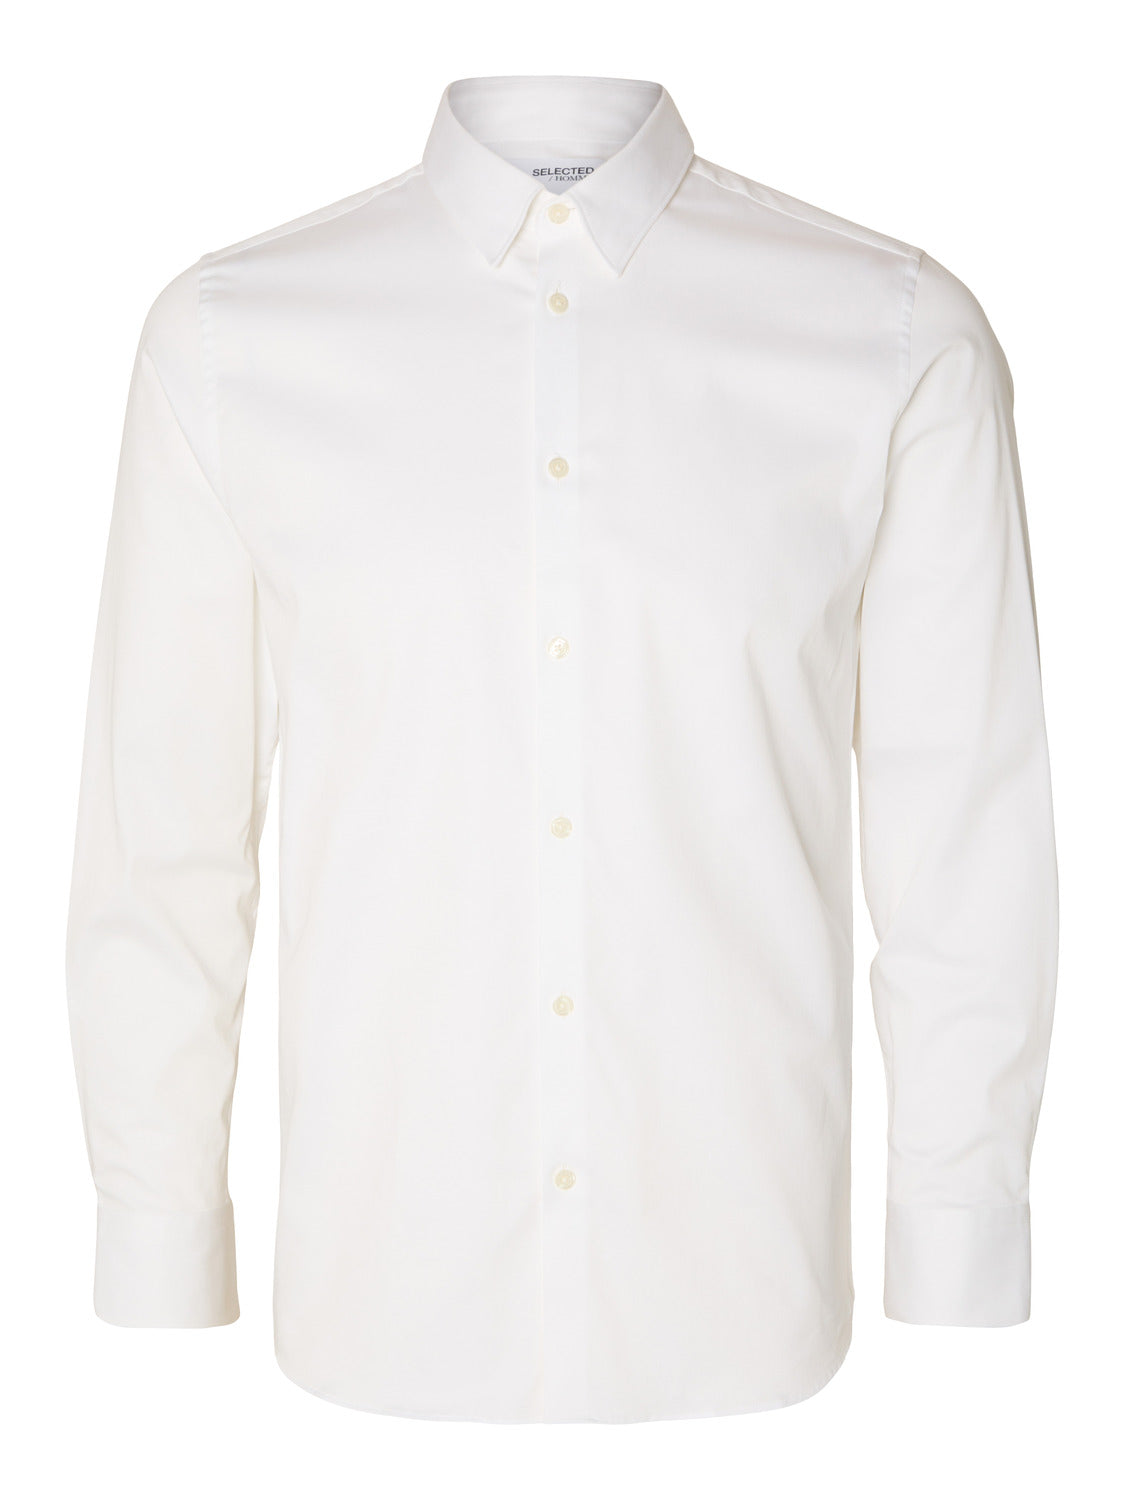 SELECTED HOMME - SUPER-SLIM Shirts - Bright White